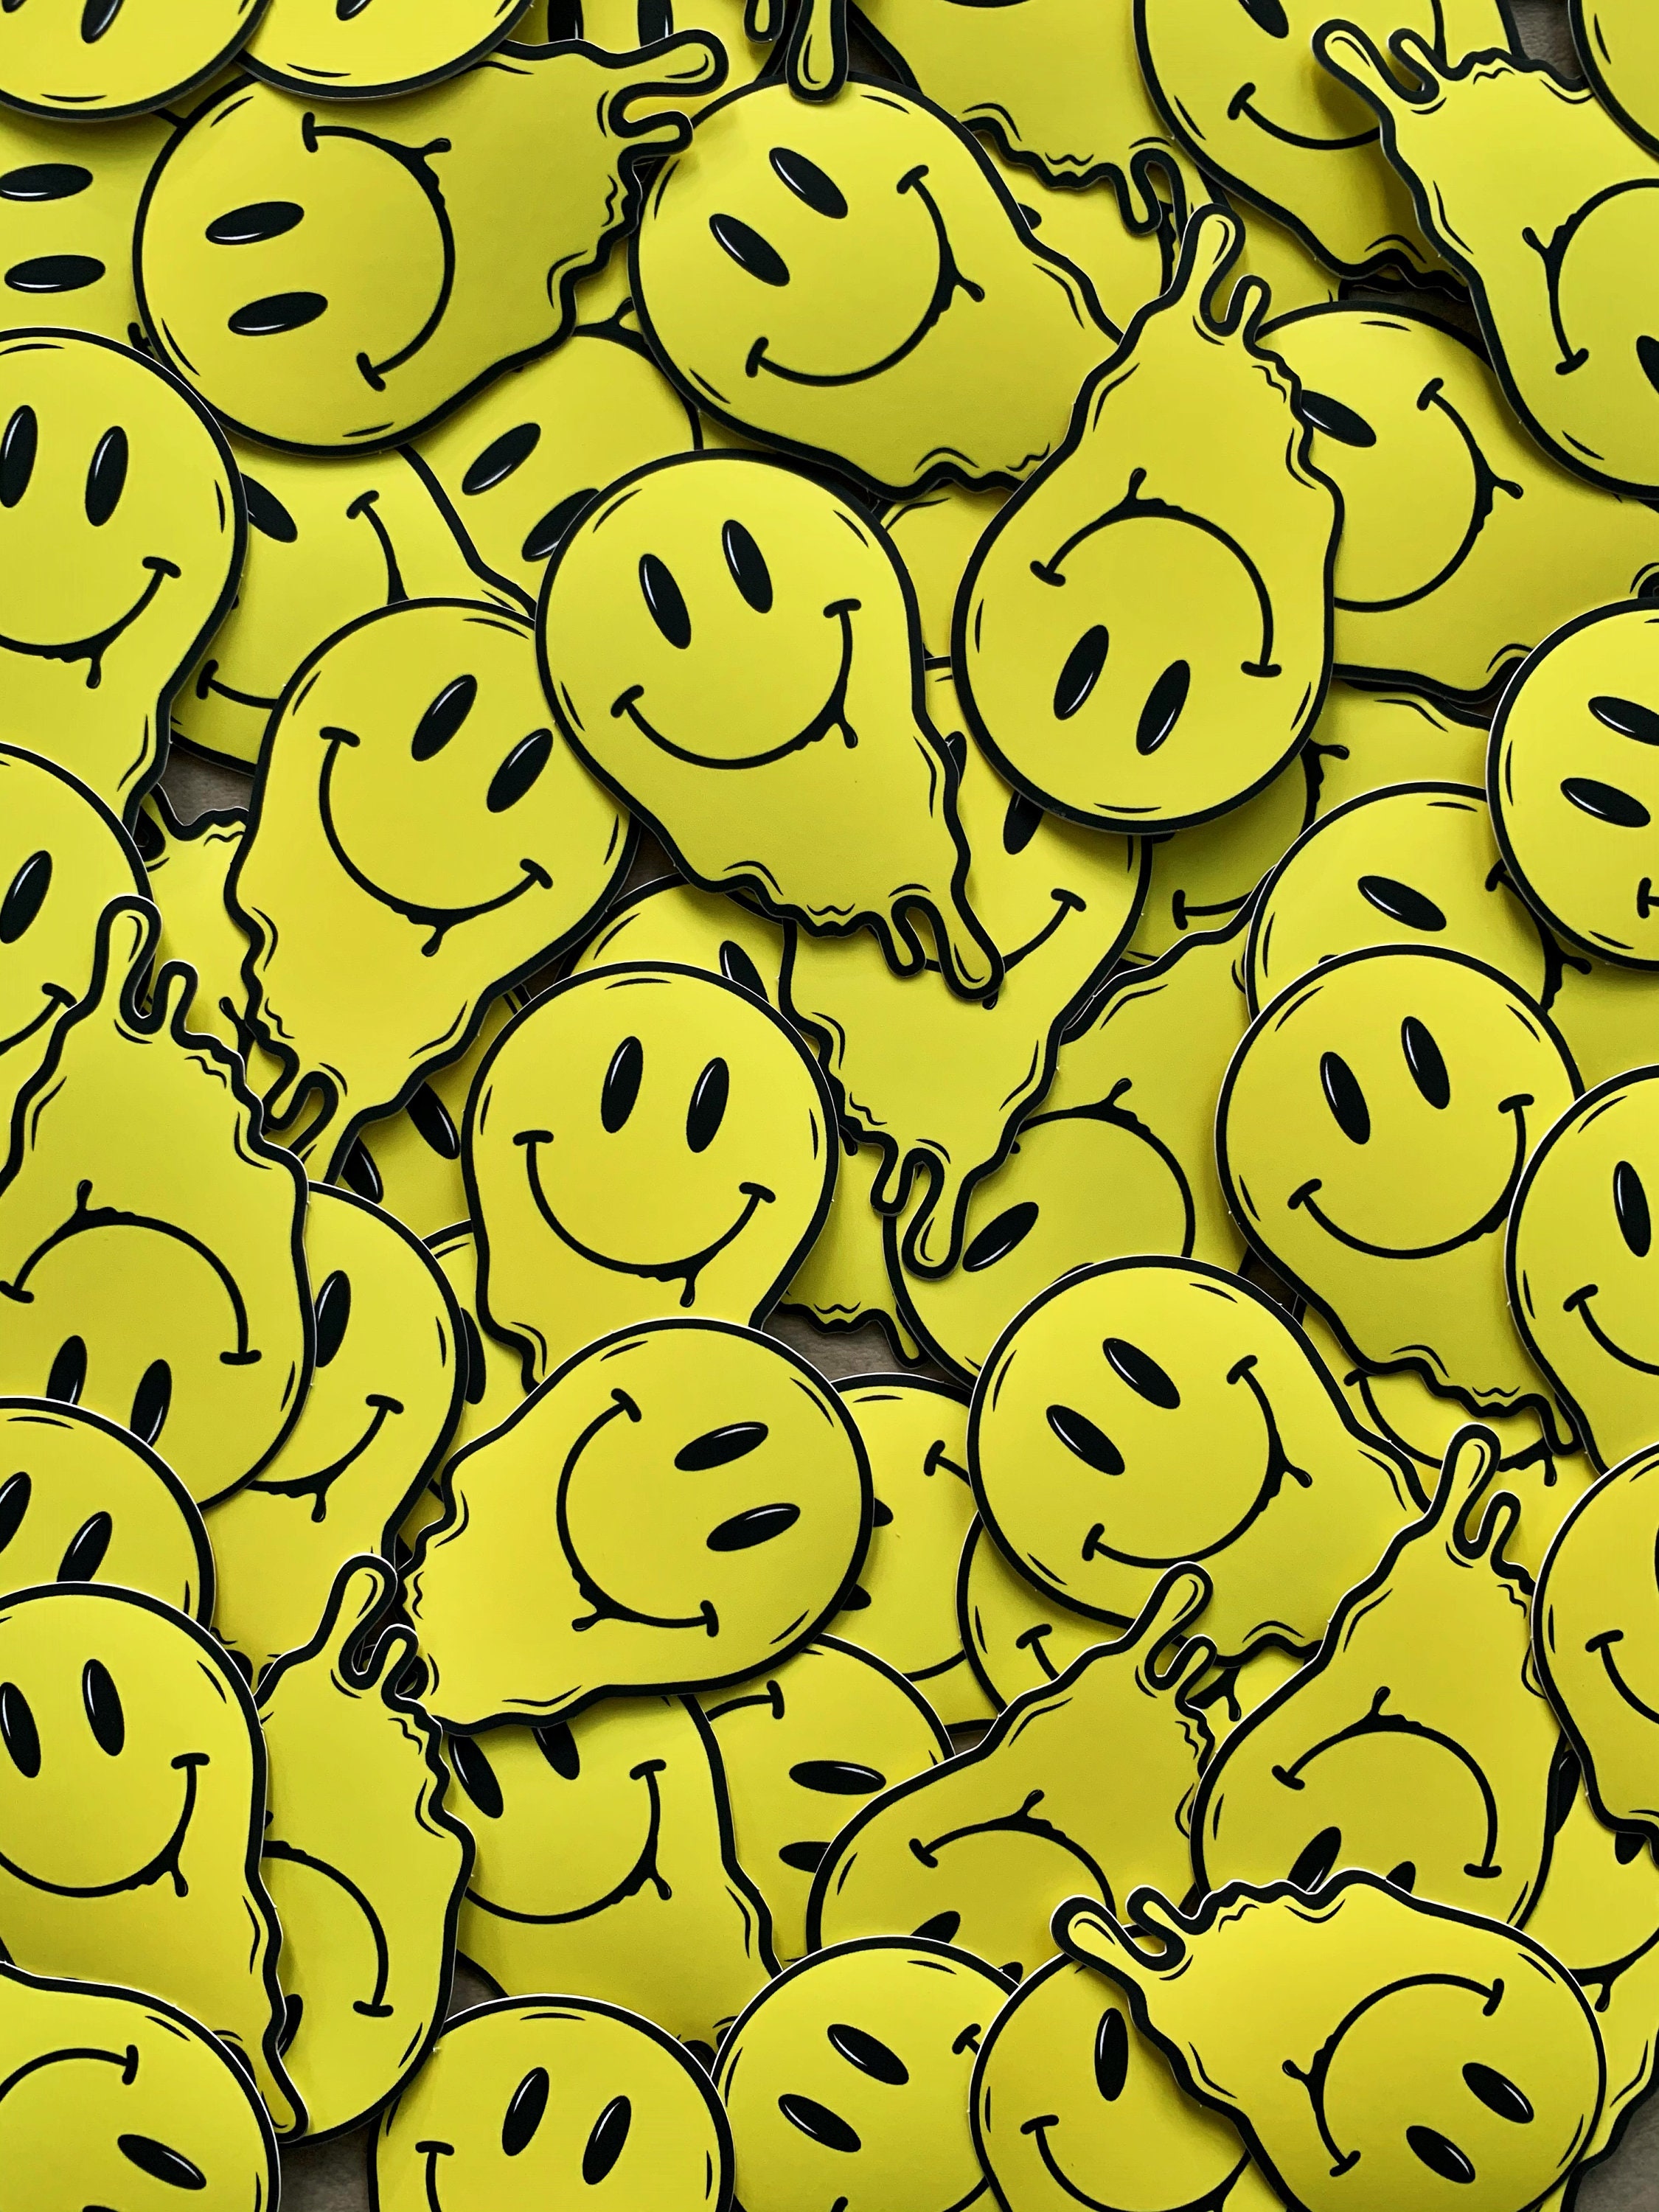 Melting Smiley Face Stickers for Sale  Redbubble